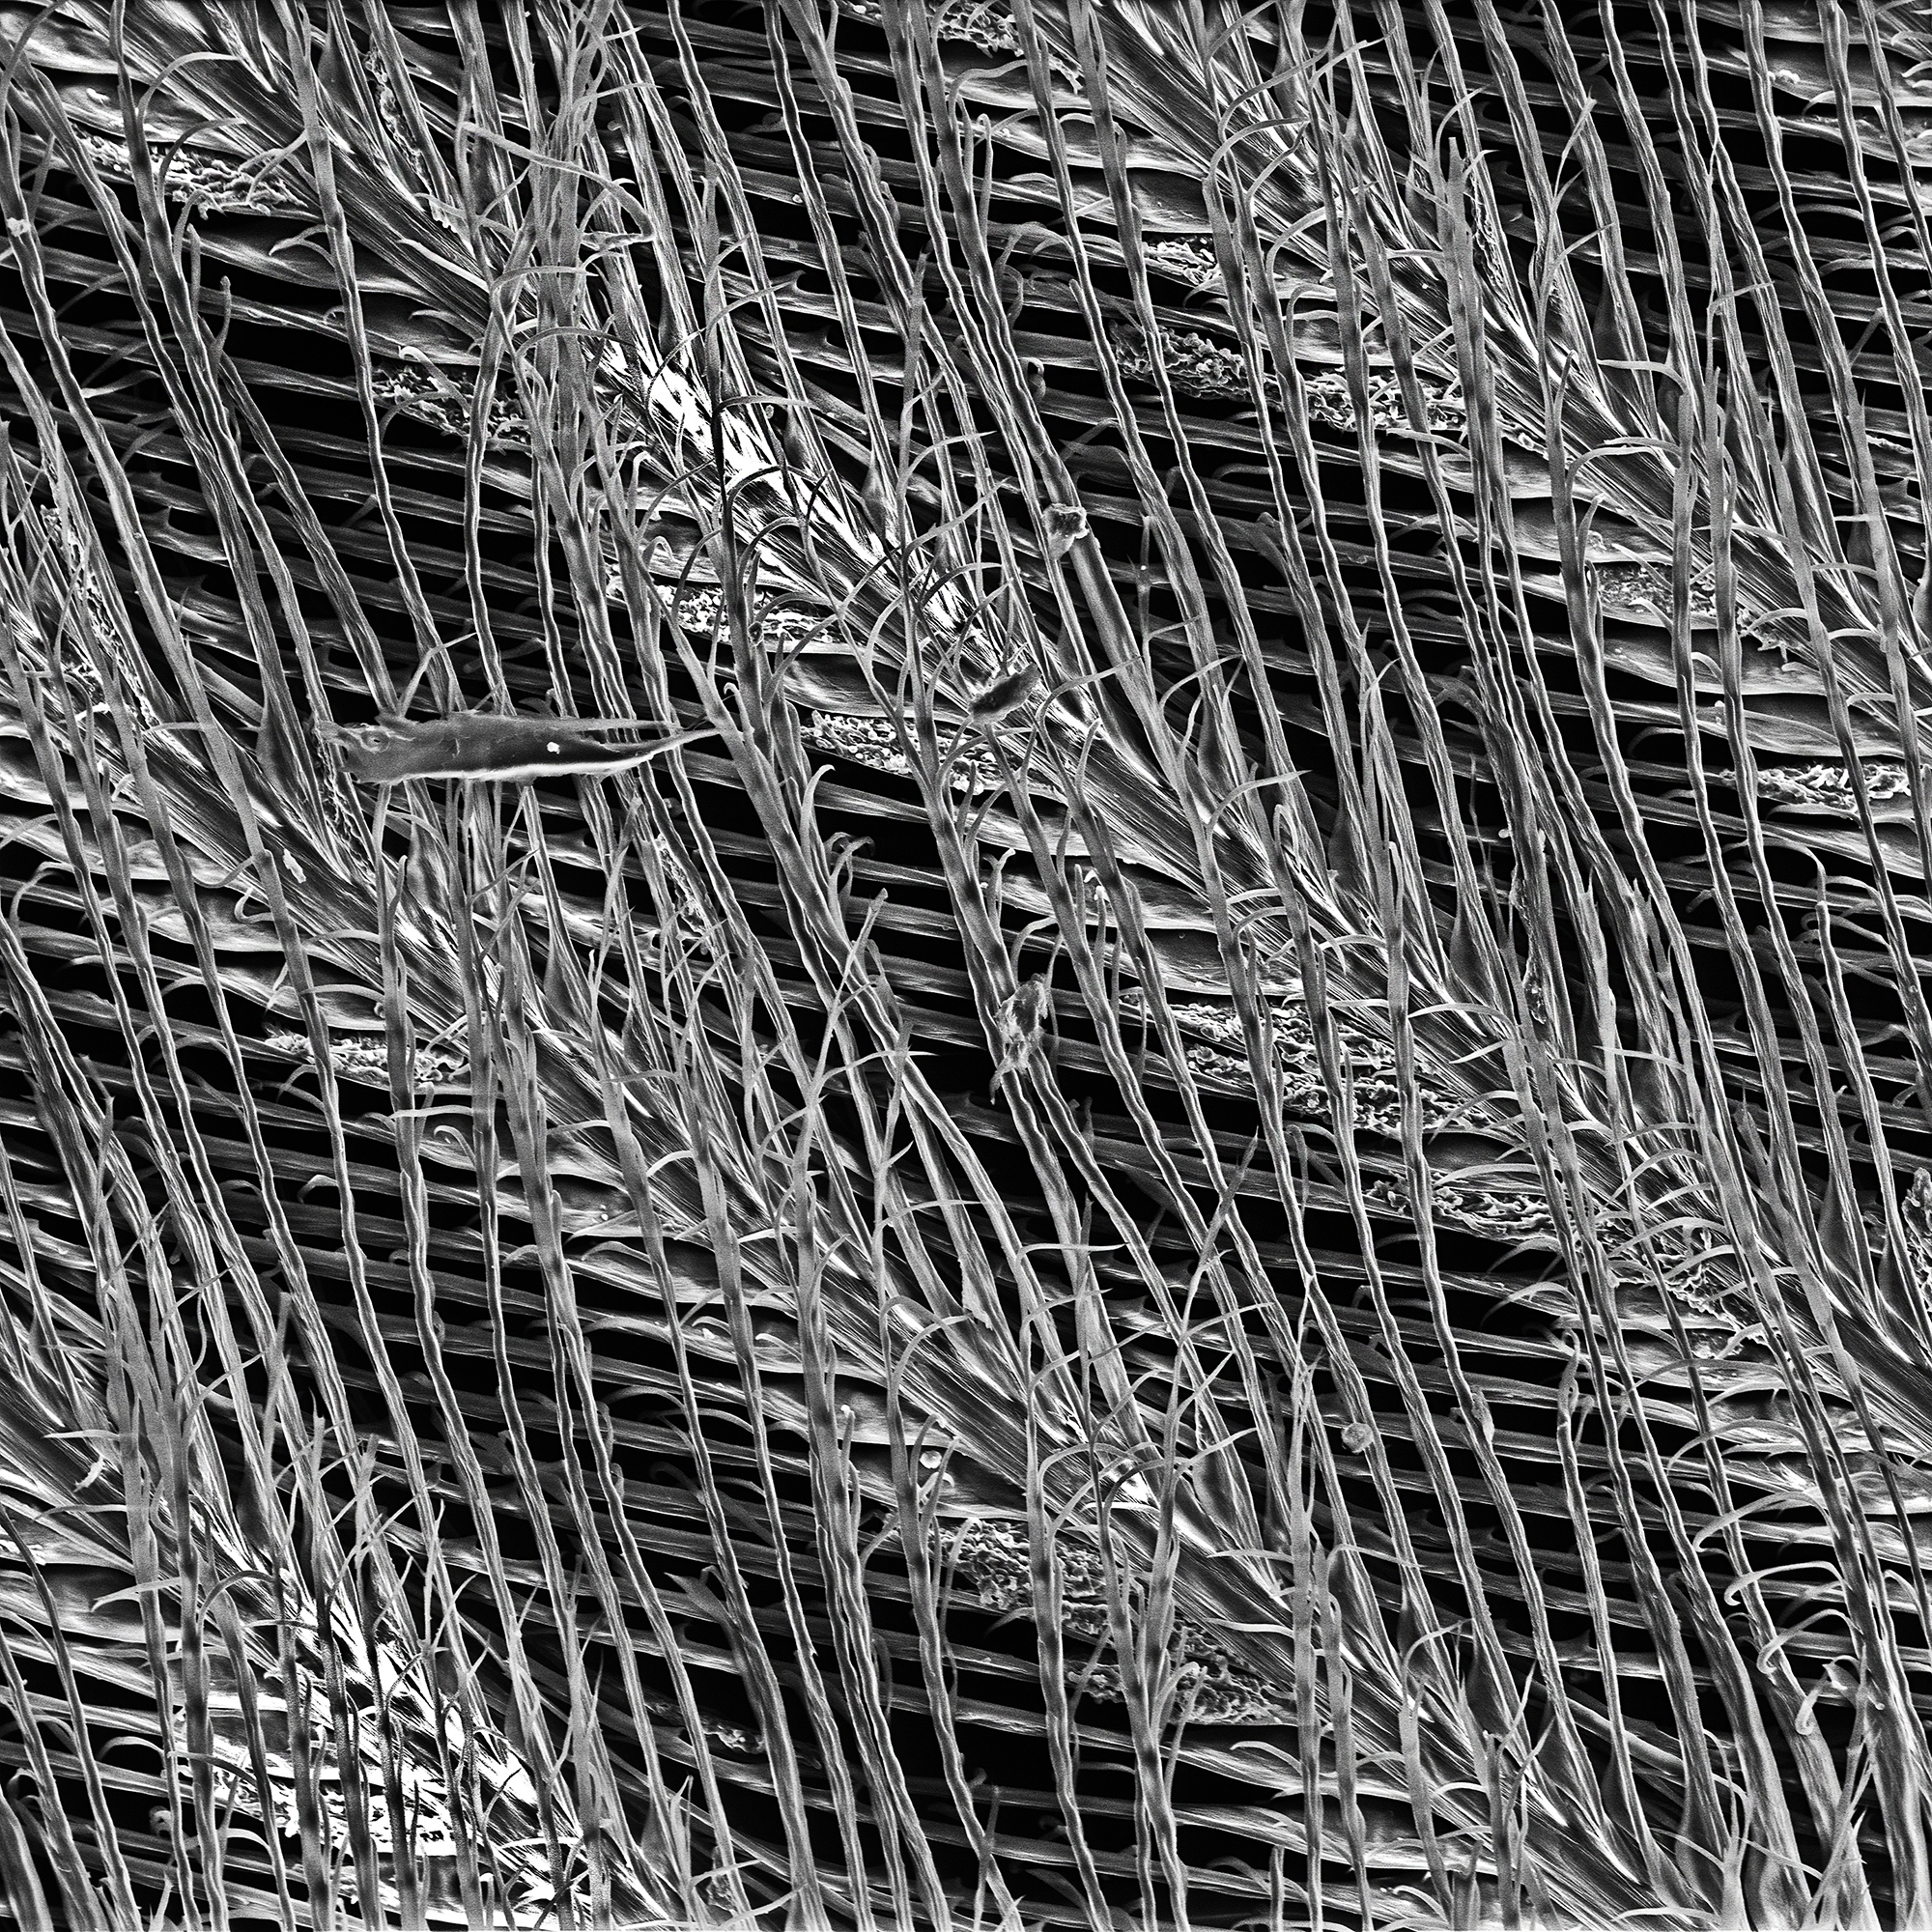 Black Carbon deposits on feather with Scanning Electron Microscope Photo: Anna Lee